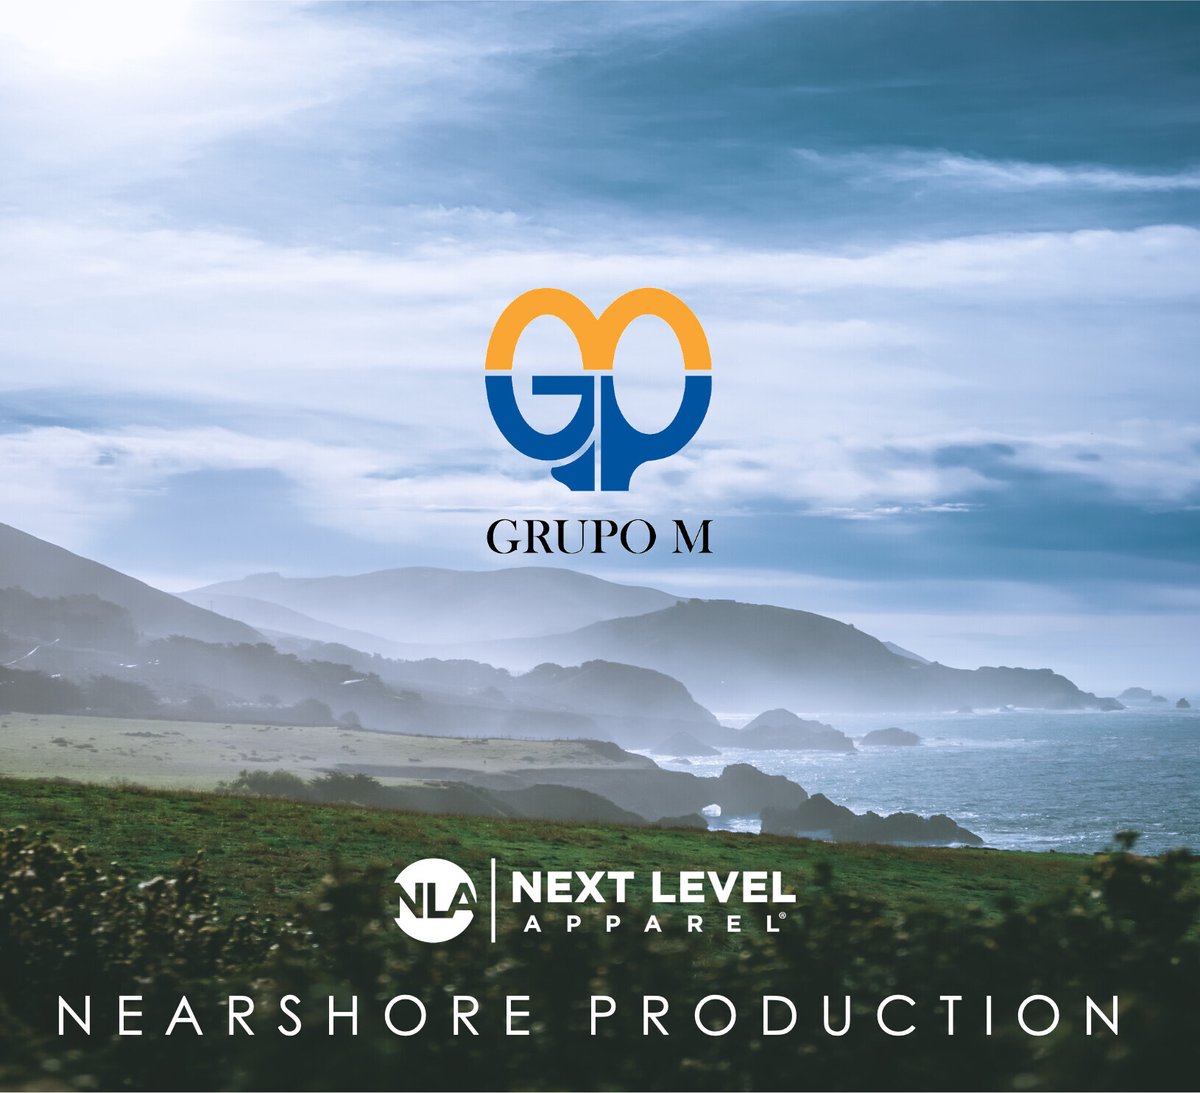 Today we announced an exciting new partnership with Grupo M, a leading textile manufacturer, to provide nearshore production while supporting our move to 100% U.S. cotton 🇺🇸 for the entire NLA apparel line.  🙌  #nla #nextlevelapparel 🌴#esg #uscotton  #transparency